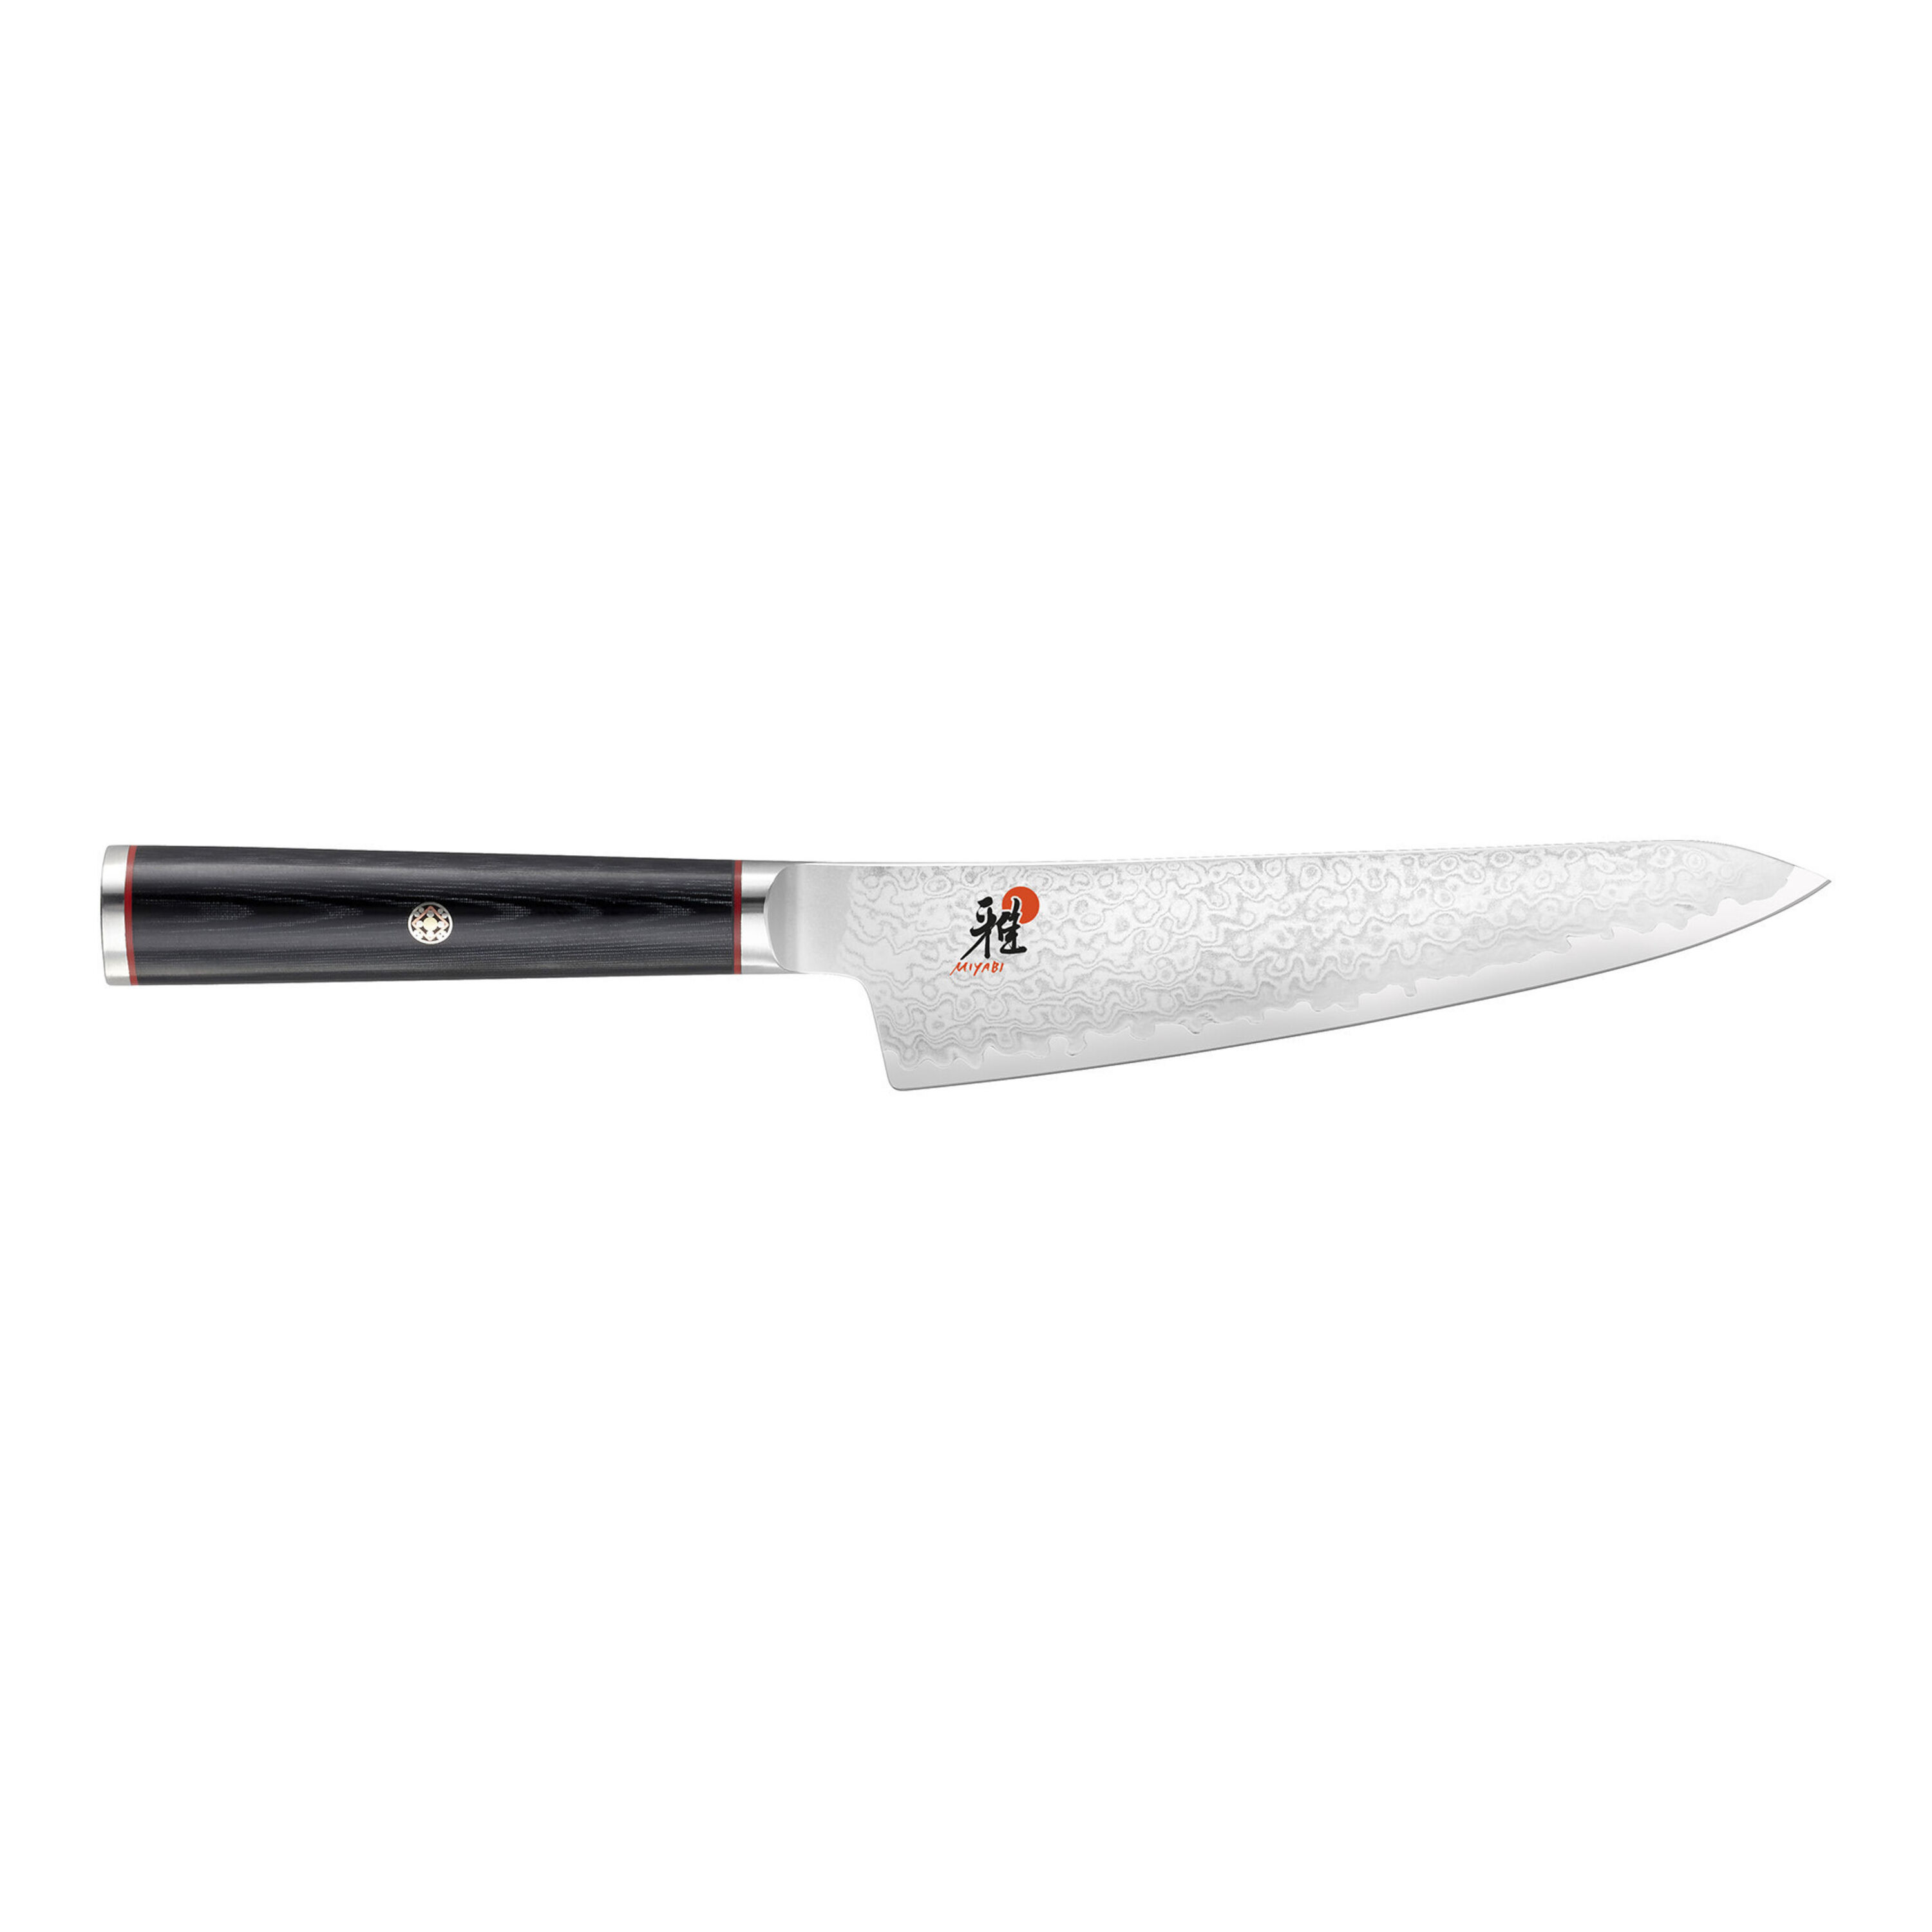 Edge French Chef's Knife, Large